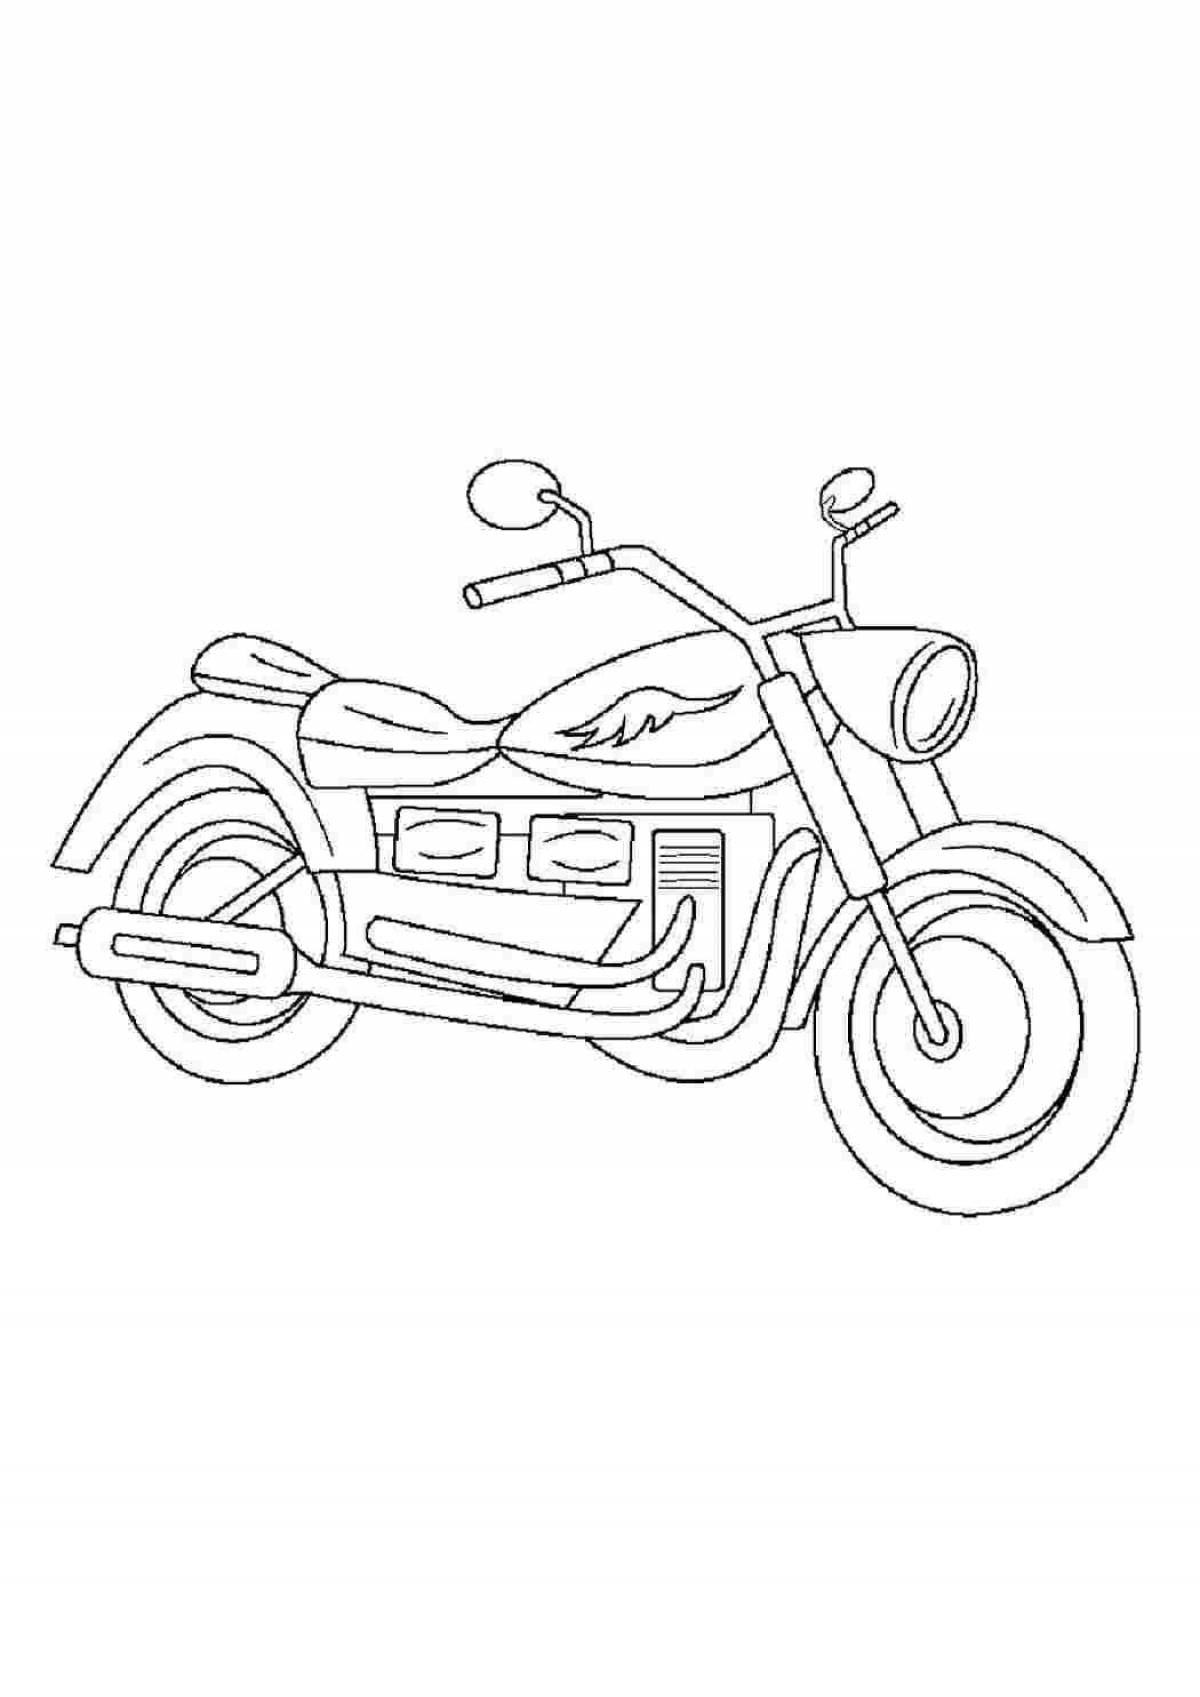 Playful motorcycle coloring page for kids